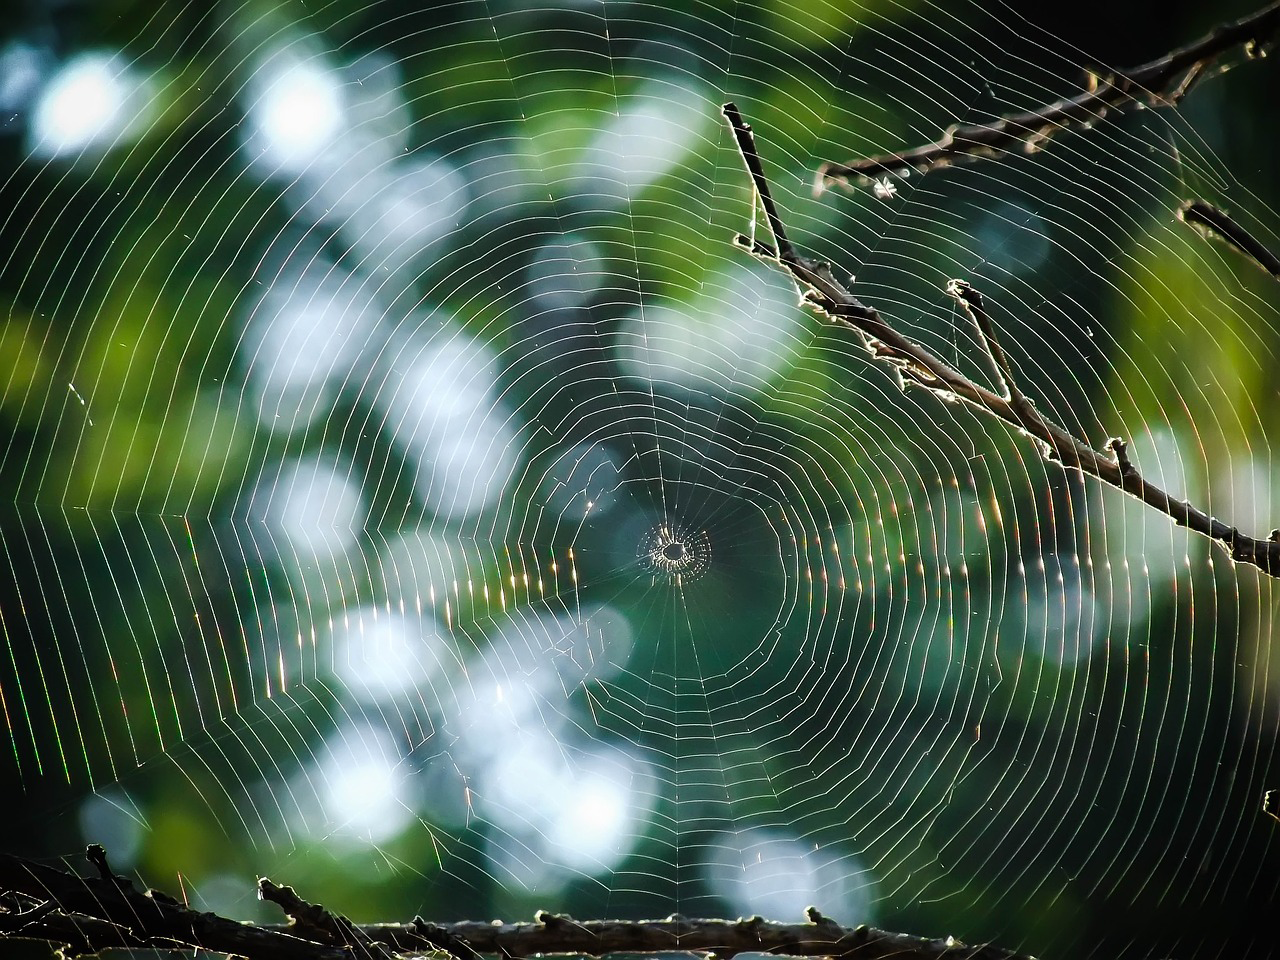 A Spiders Web in a Garden